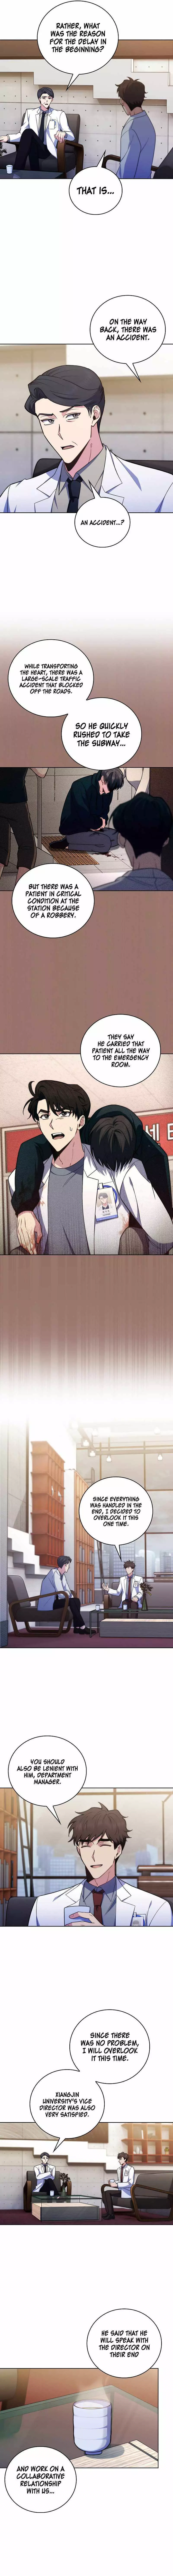 Level-Up Doctor (Manhwa) - 79 page 8-1365f460